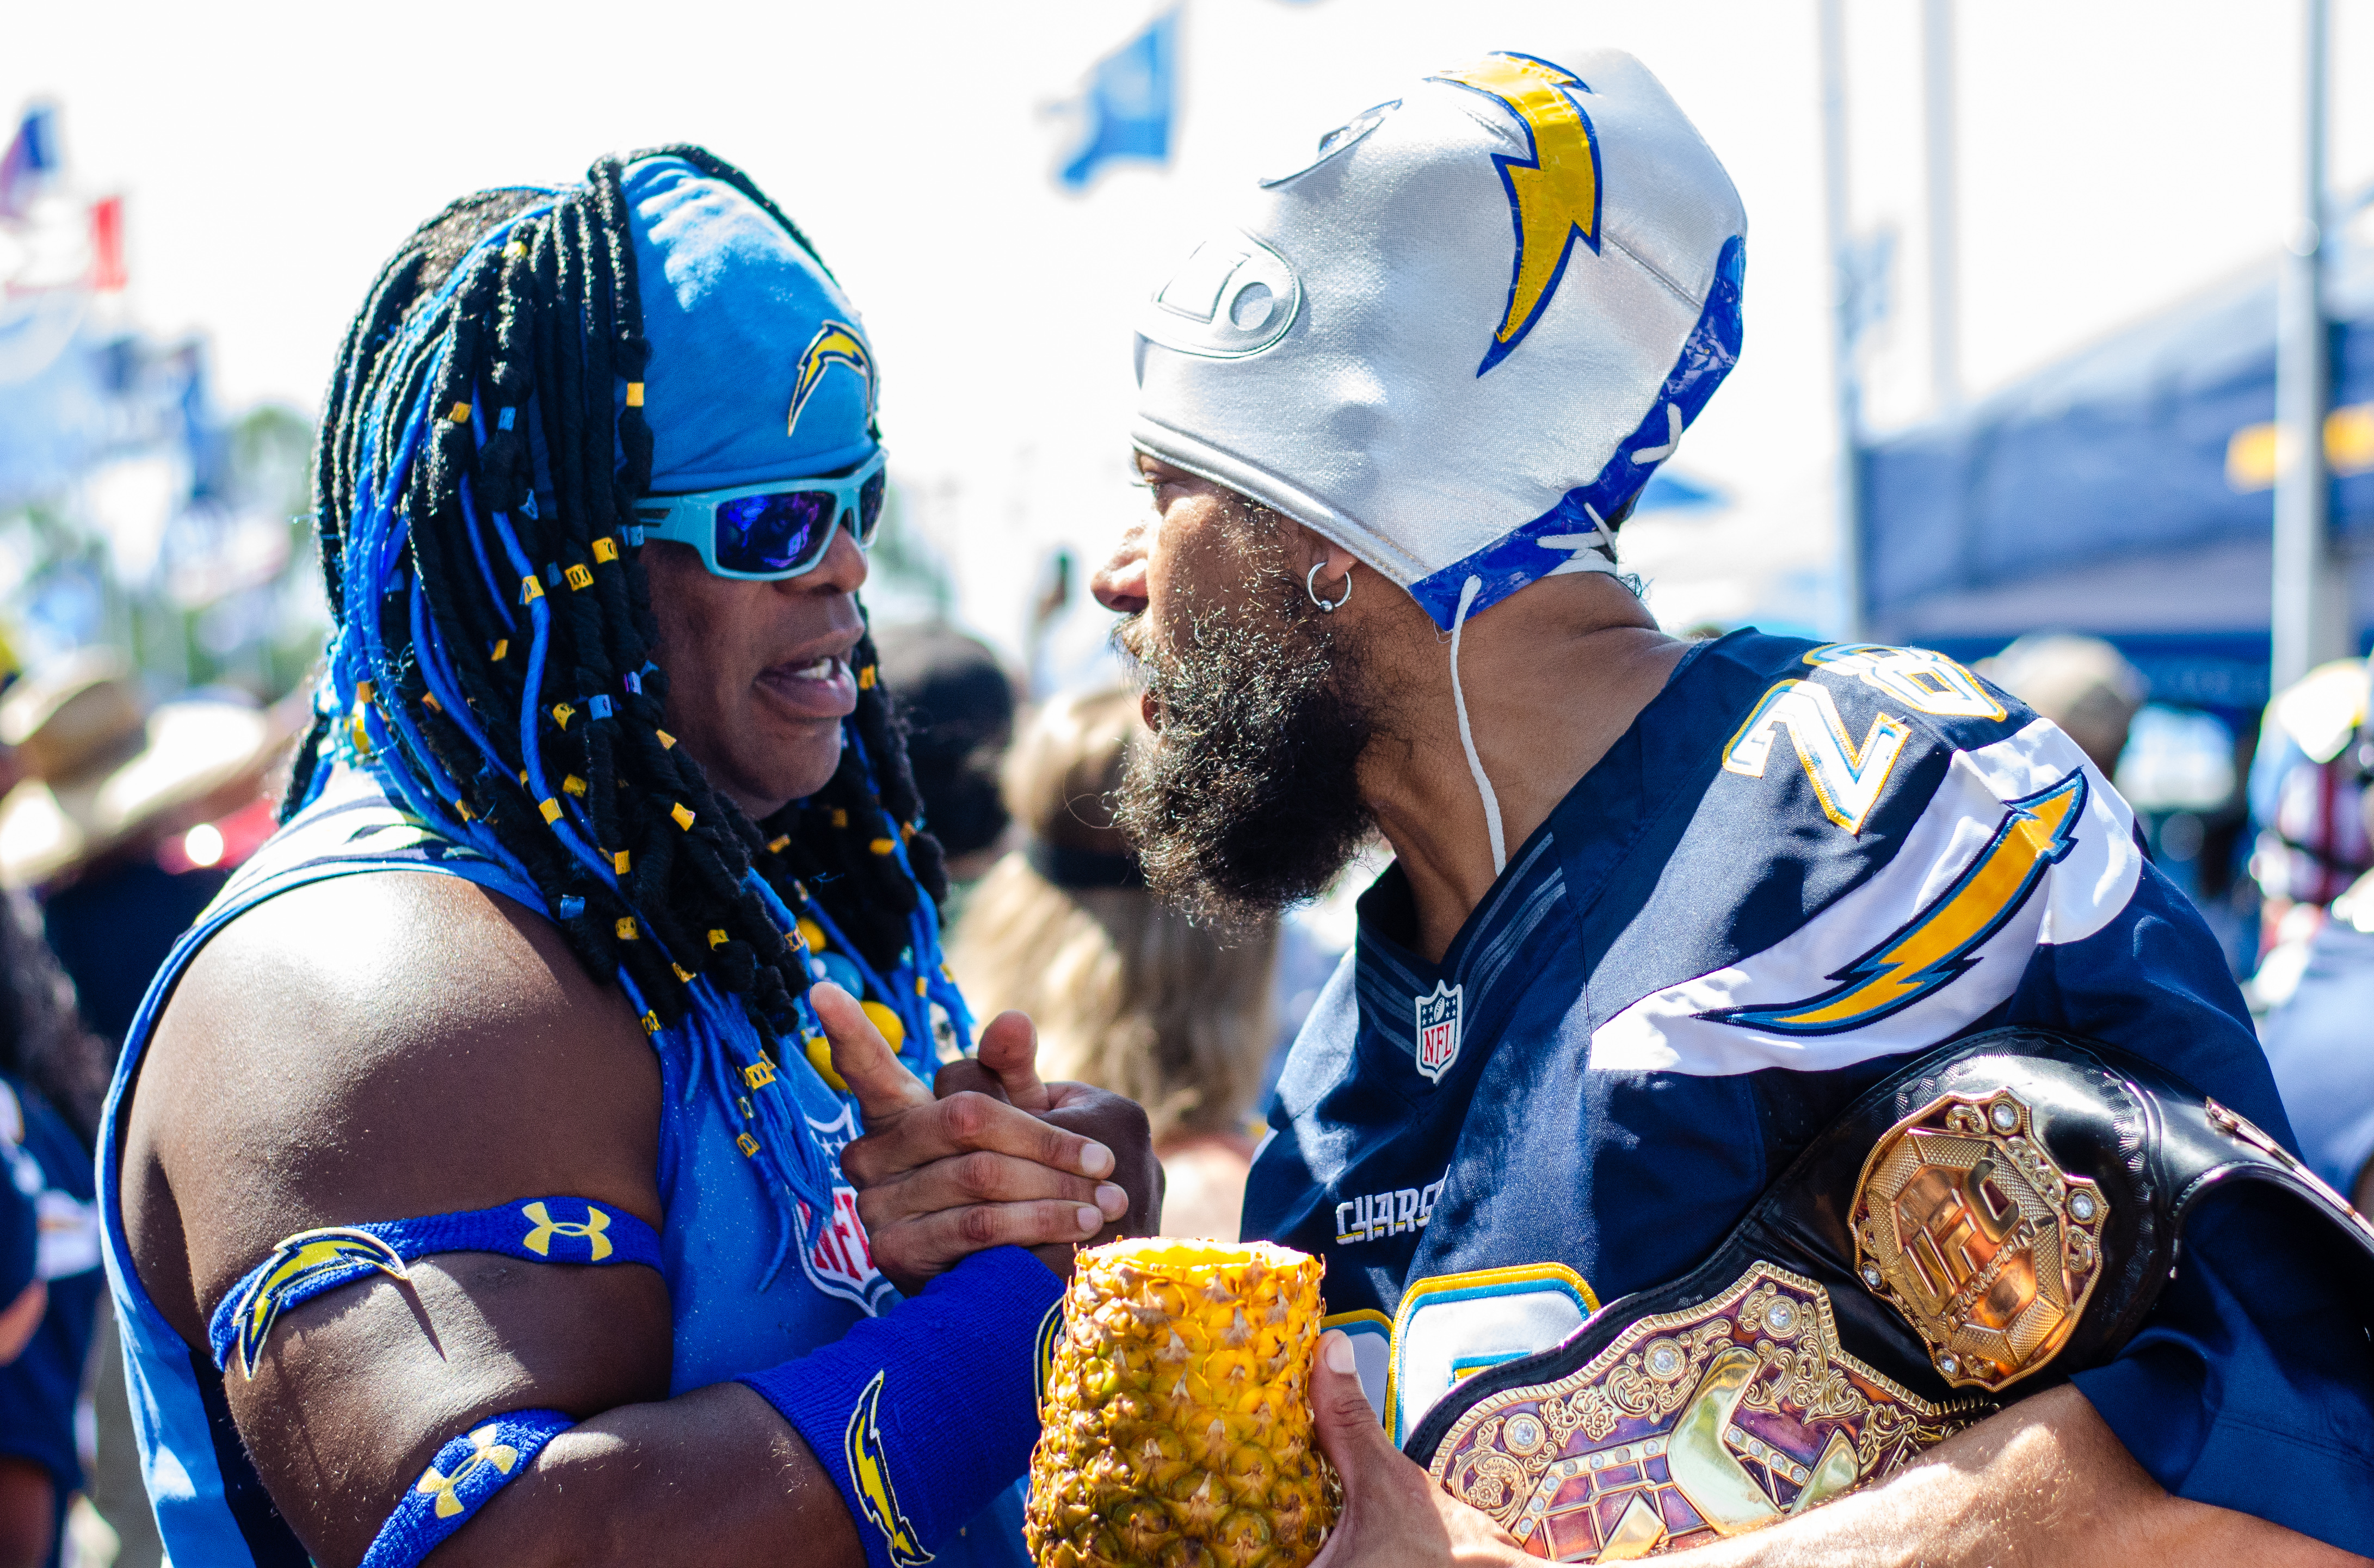 It’s Two Weeks Late, but here is The Bulletin’s 2019 Chargers Season Preview